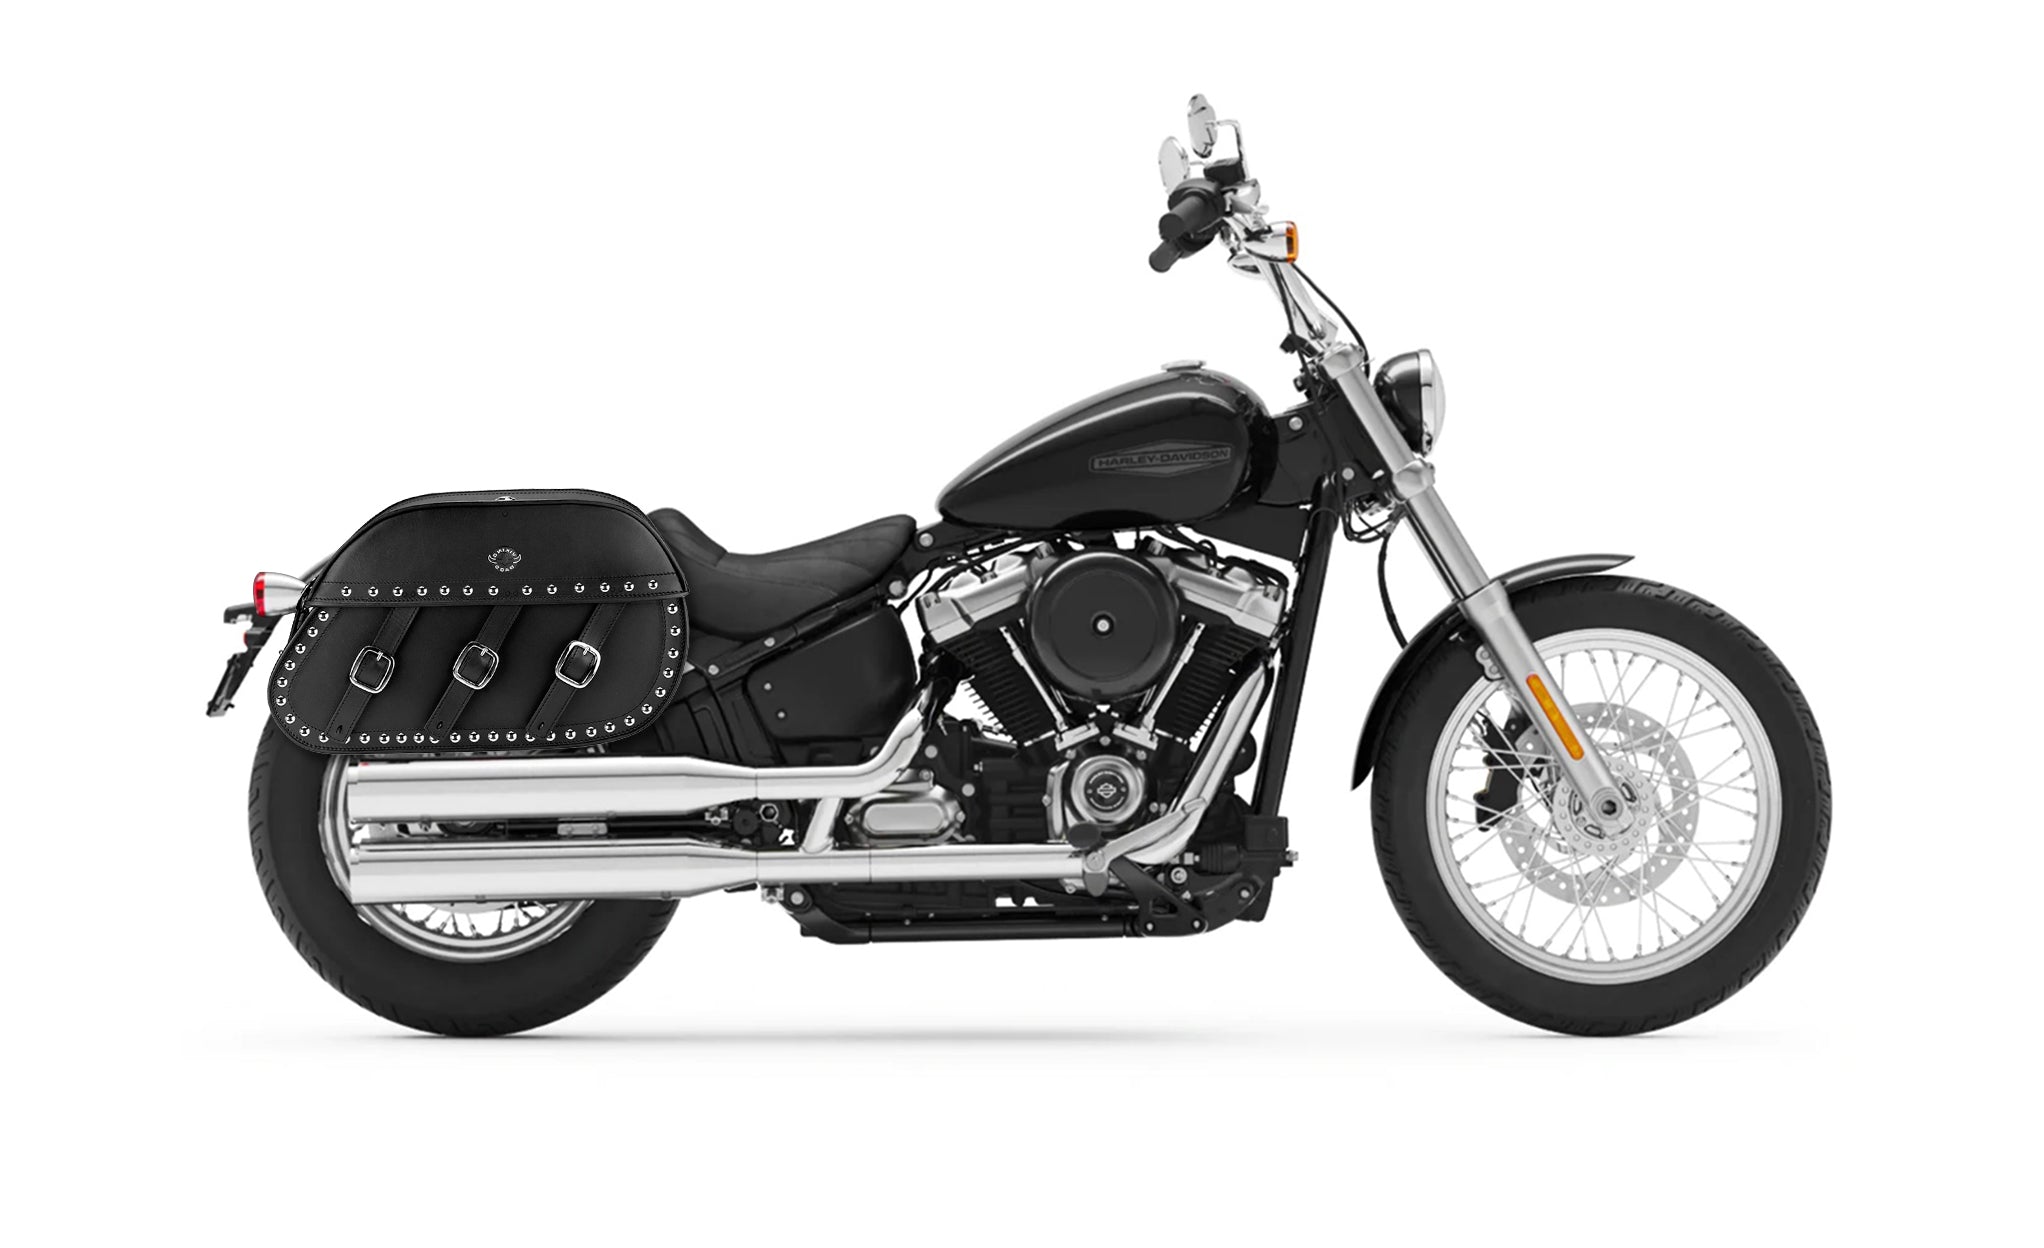 34L - Trianon Extra Large Studded Leather Saddlebags for Harley Softail Low Rider ST FXLRST on Bike Photo @expand